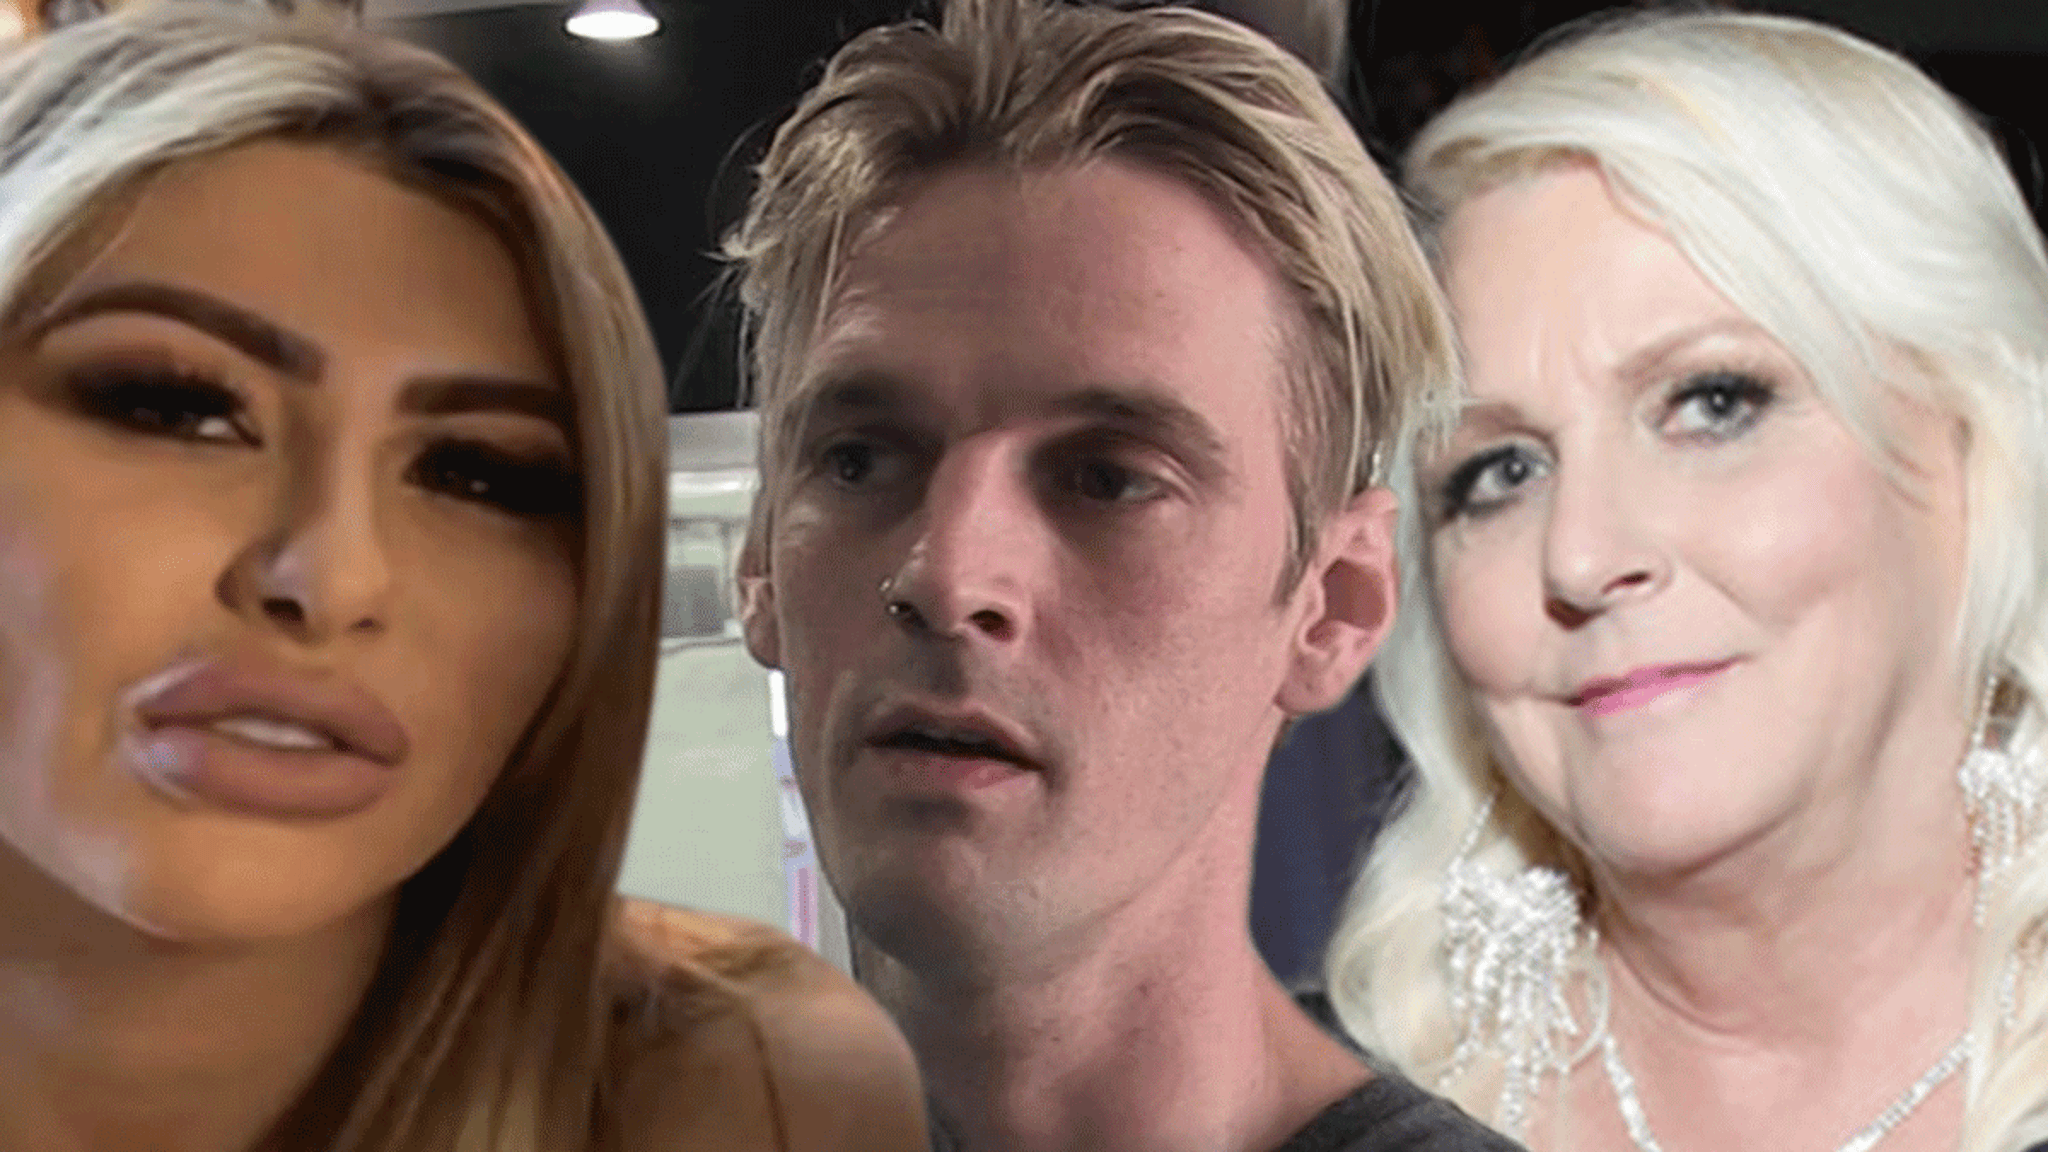 Hurt by her mother’s accusation, Aaron Carter’s ex-fiancée is on good terms before dying